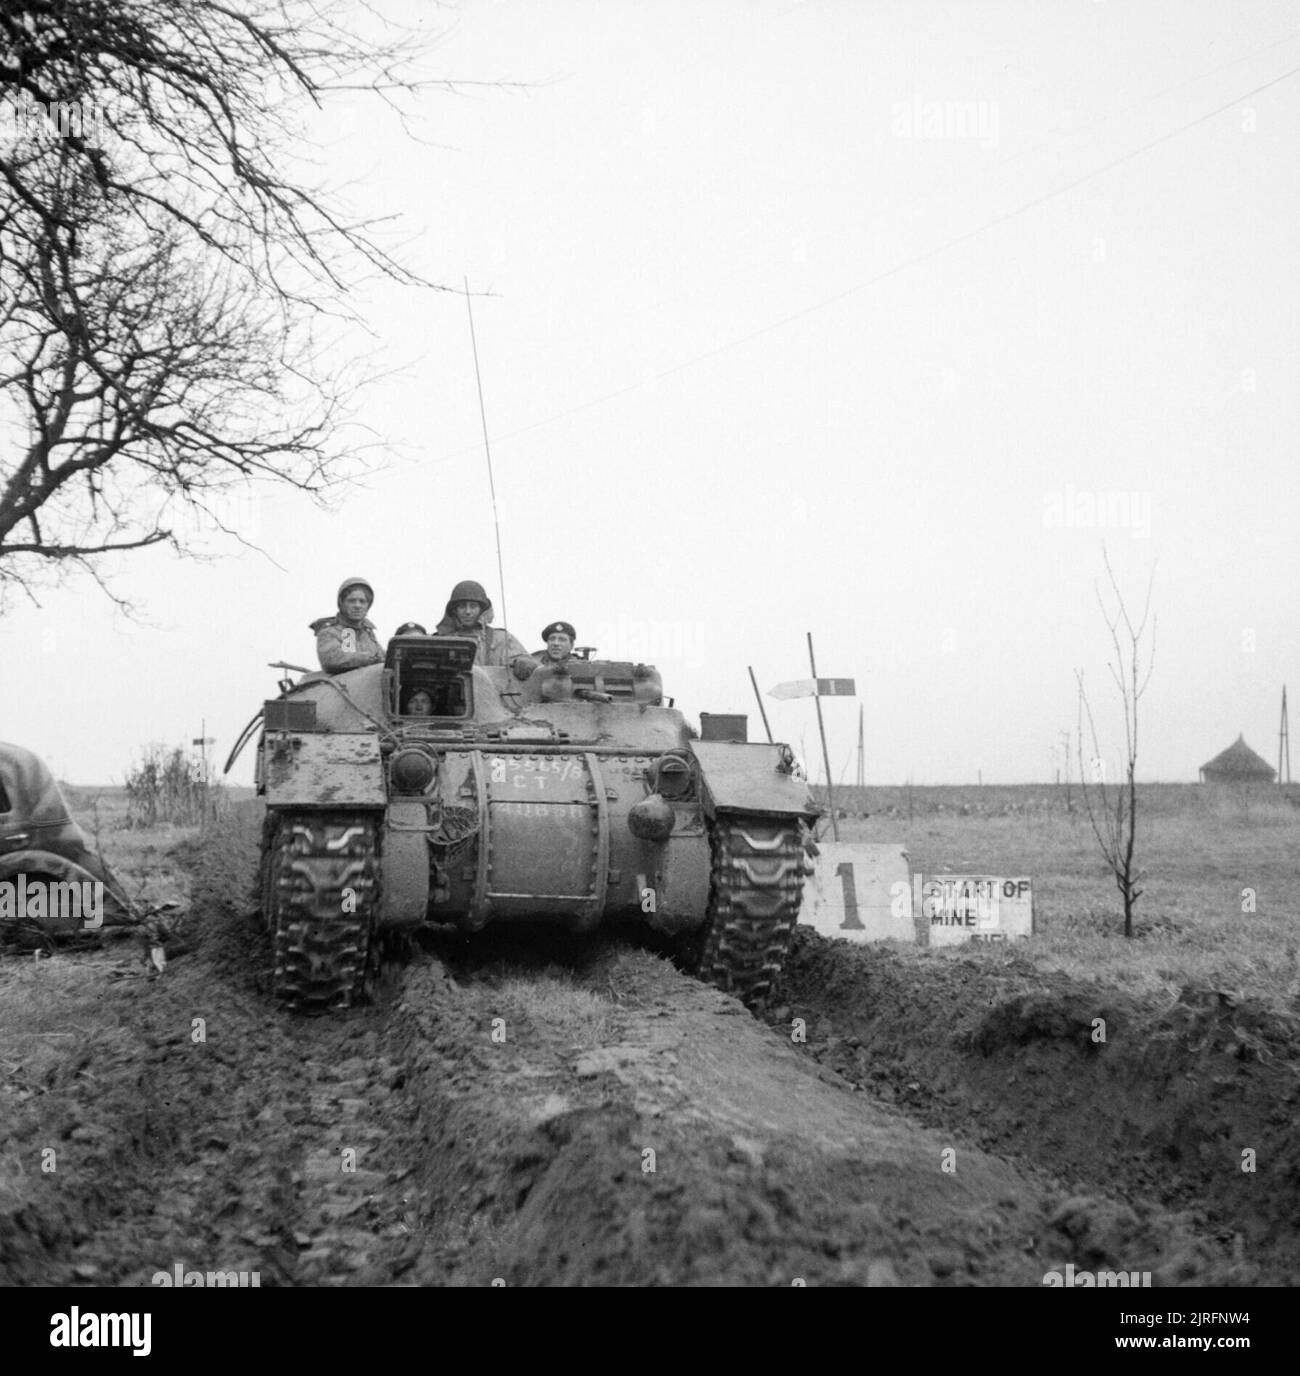 Ram Kangaroo armoured personnel carrier during the assault by 15th (Scottish) Division on Blerick, Holland, 3 December 1944. Ram Kangaroo armoured personnel carrier during the assault by 15th (Scottish) Division on Blerick, 3 December 1944. Stock Photo